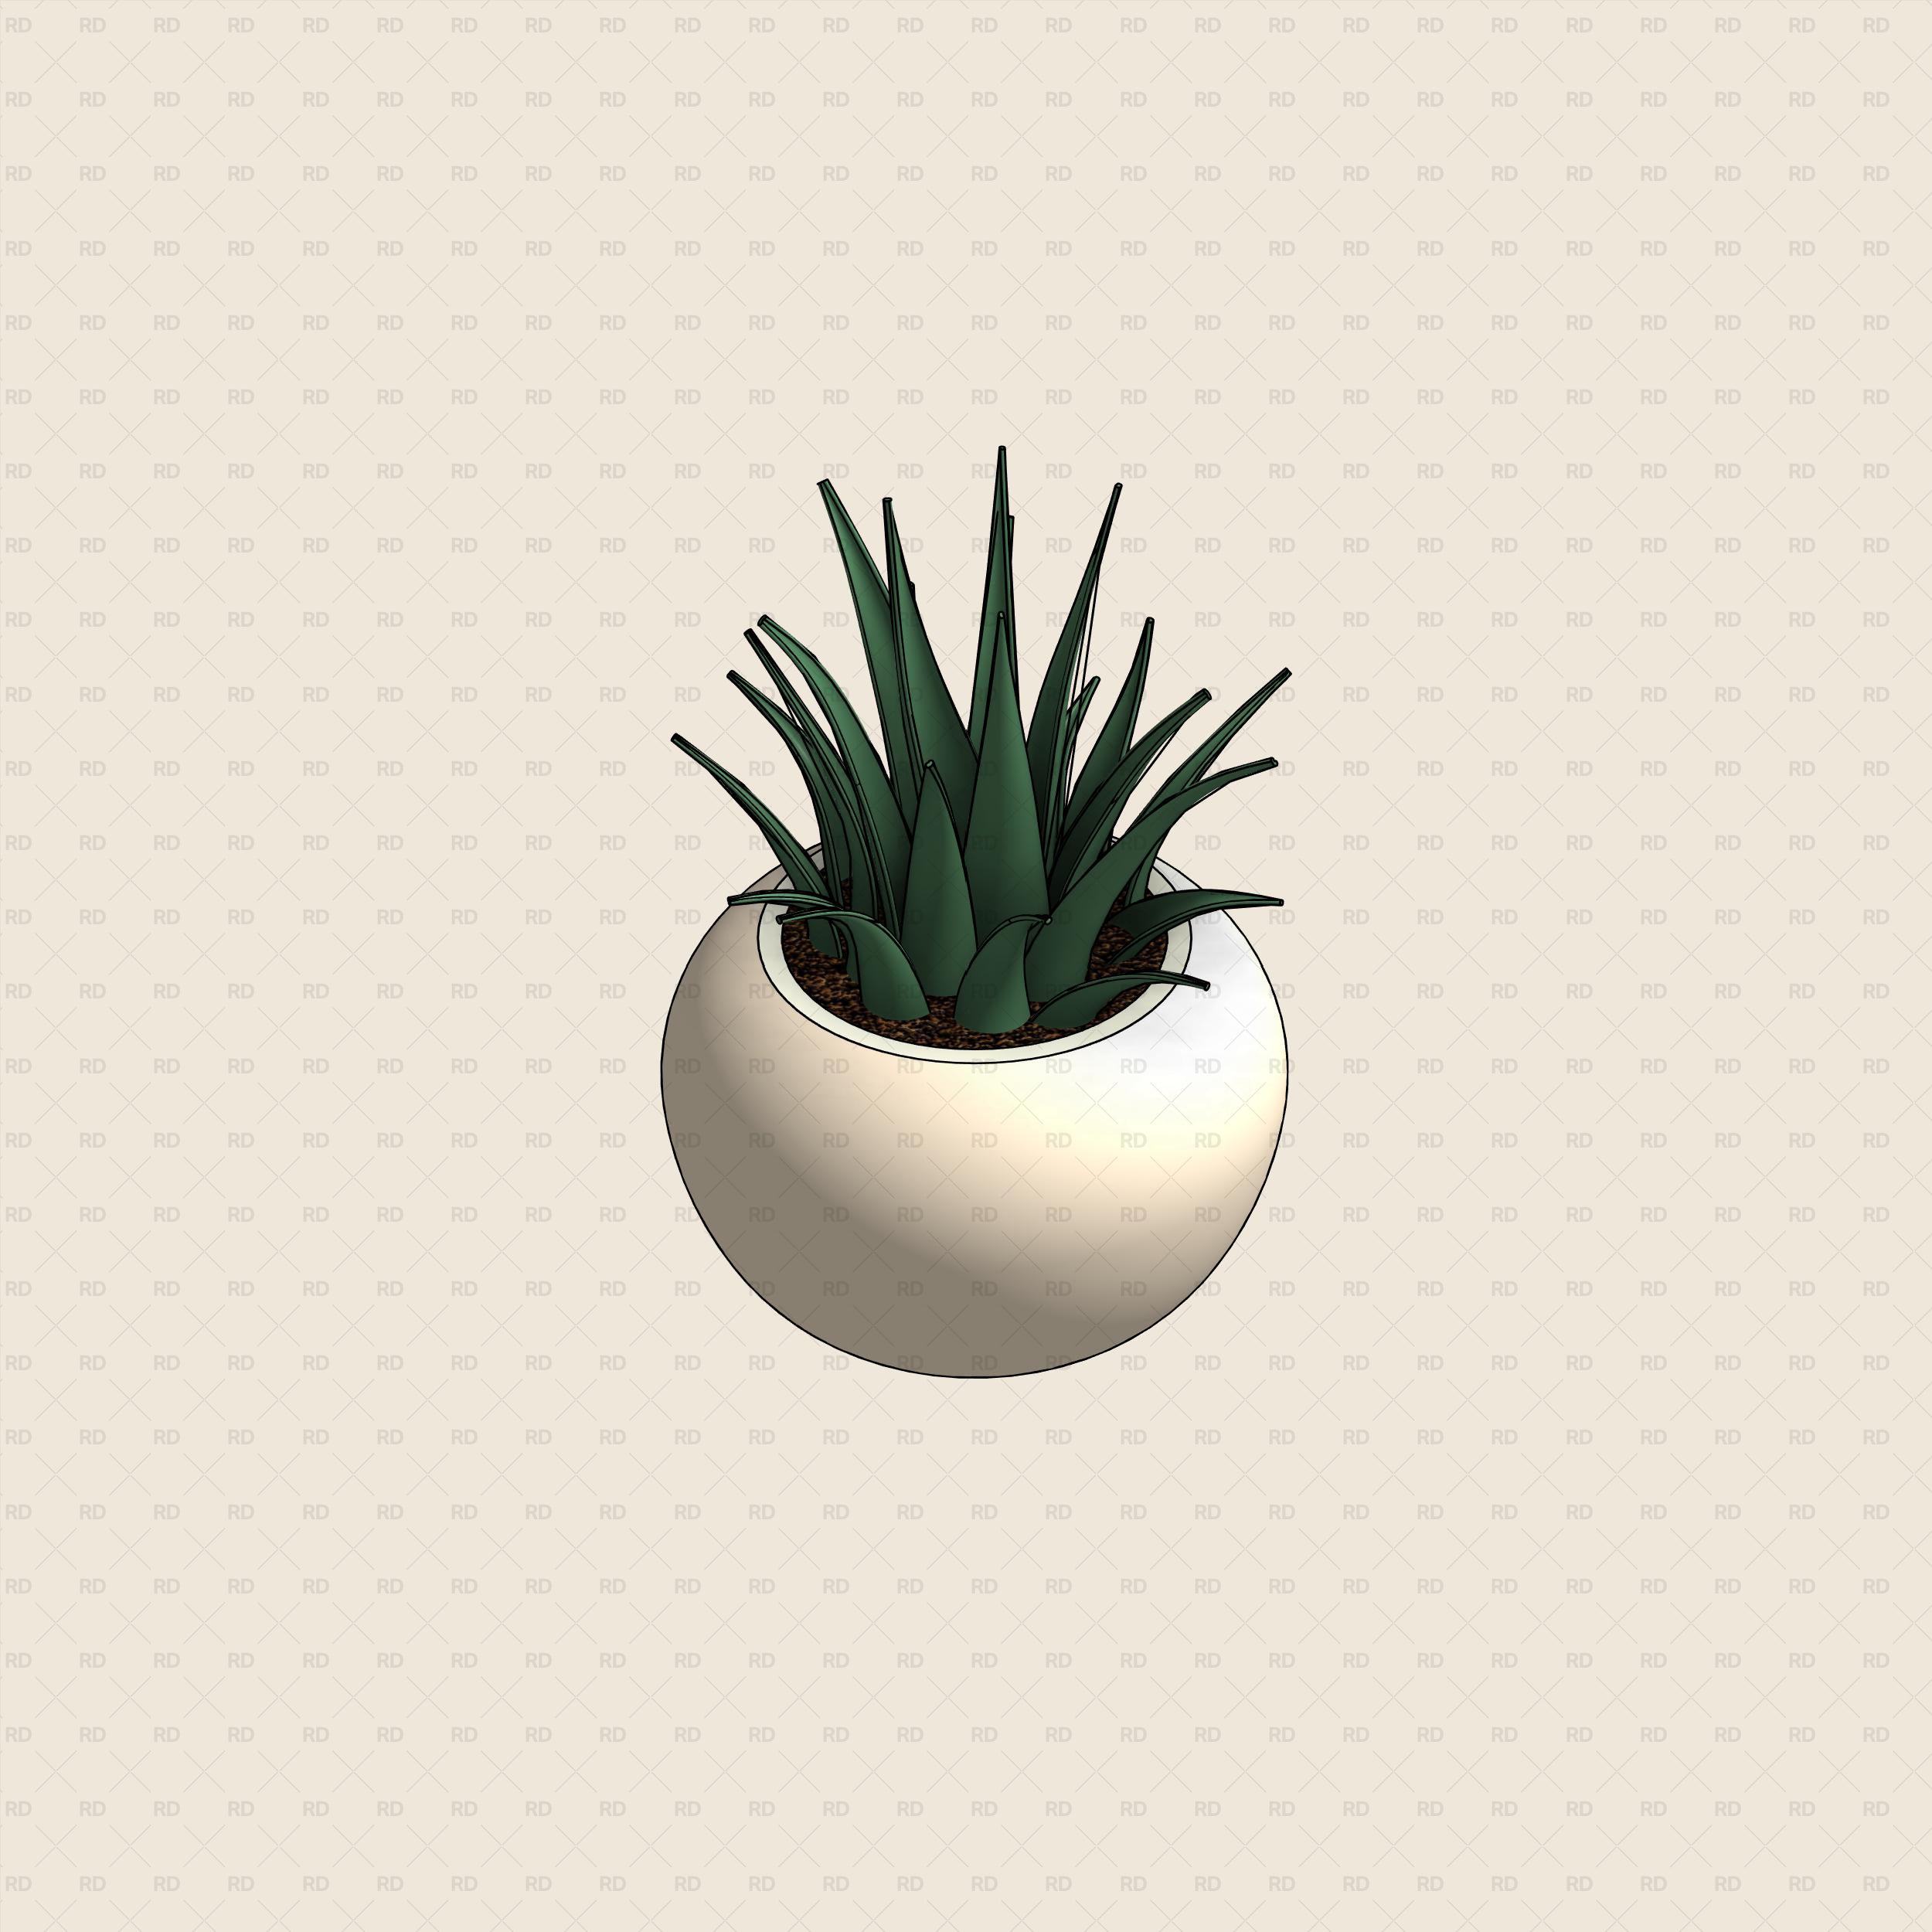 Revit Family of Interior Potted Plant